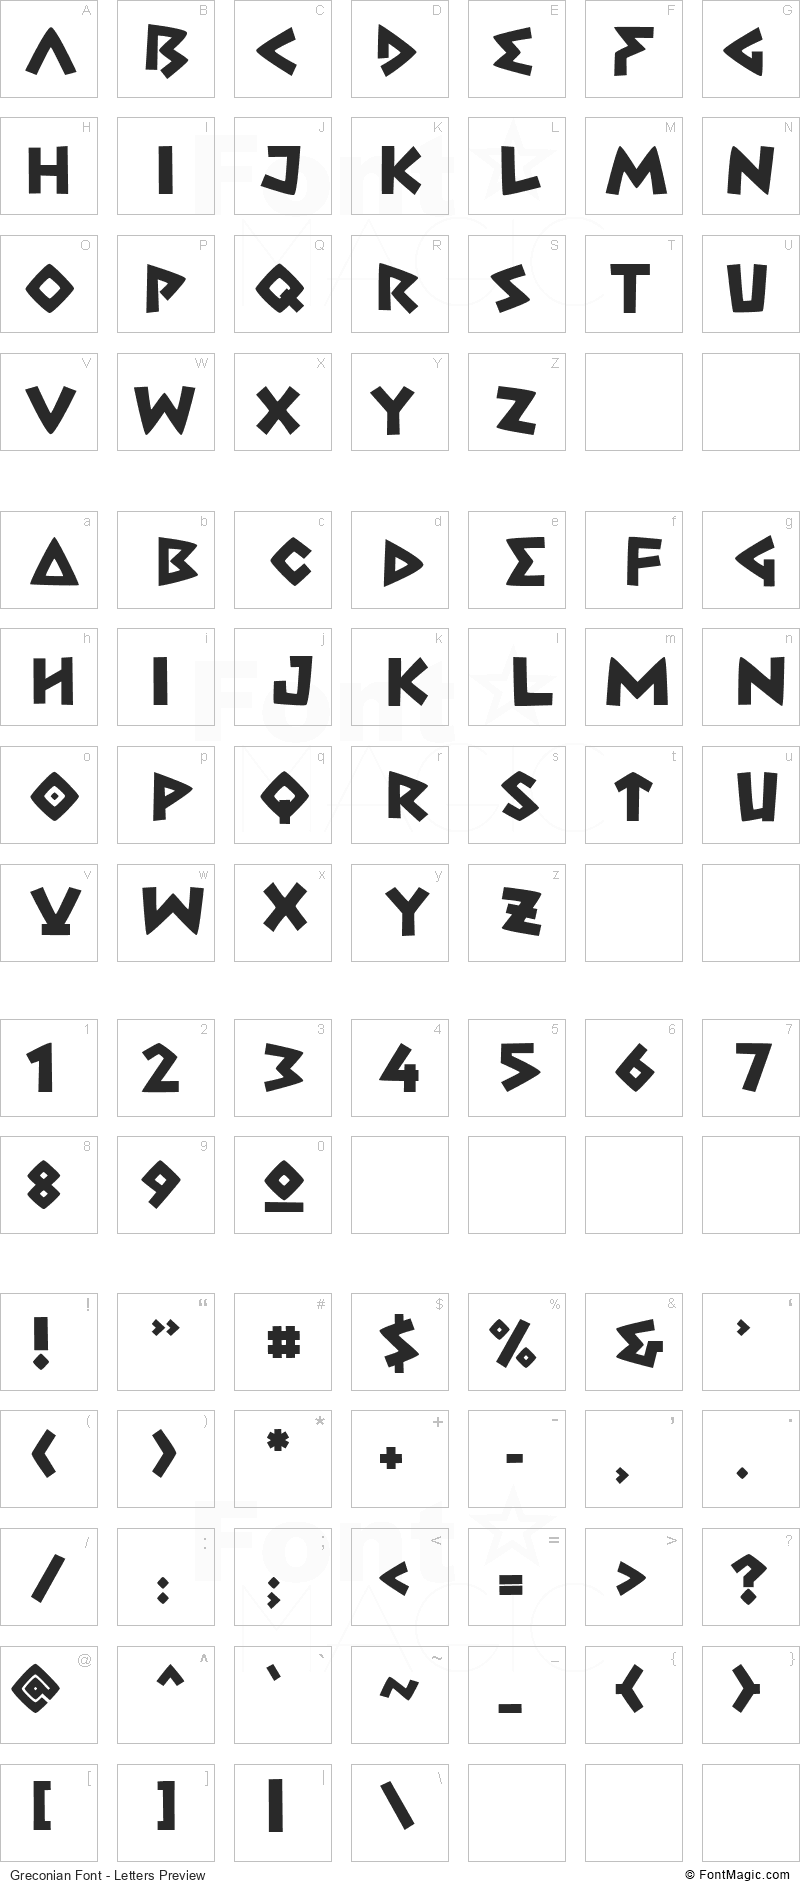 Greconian Font - All Latters Preview Chart